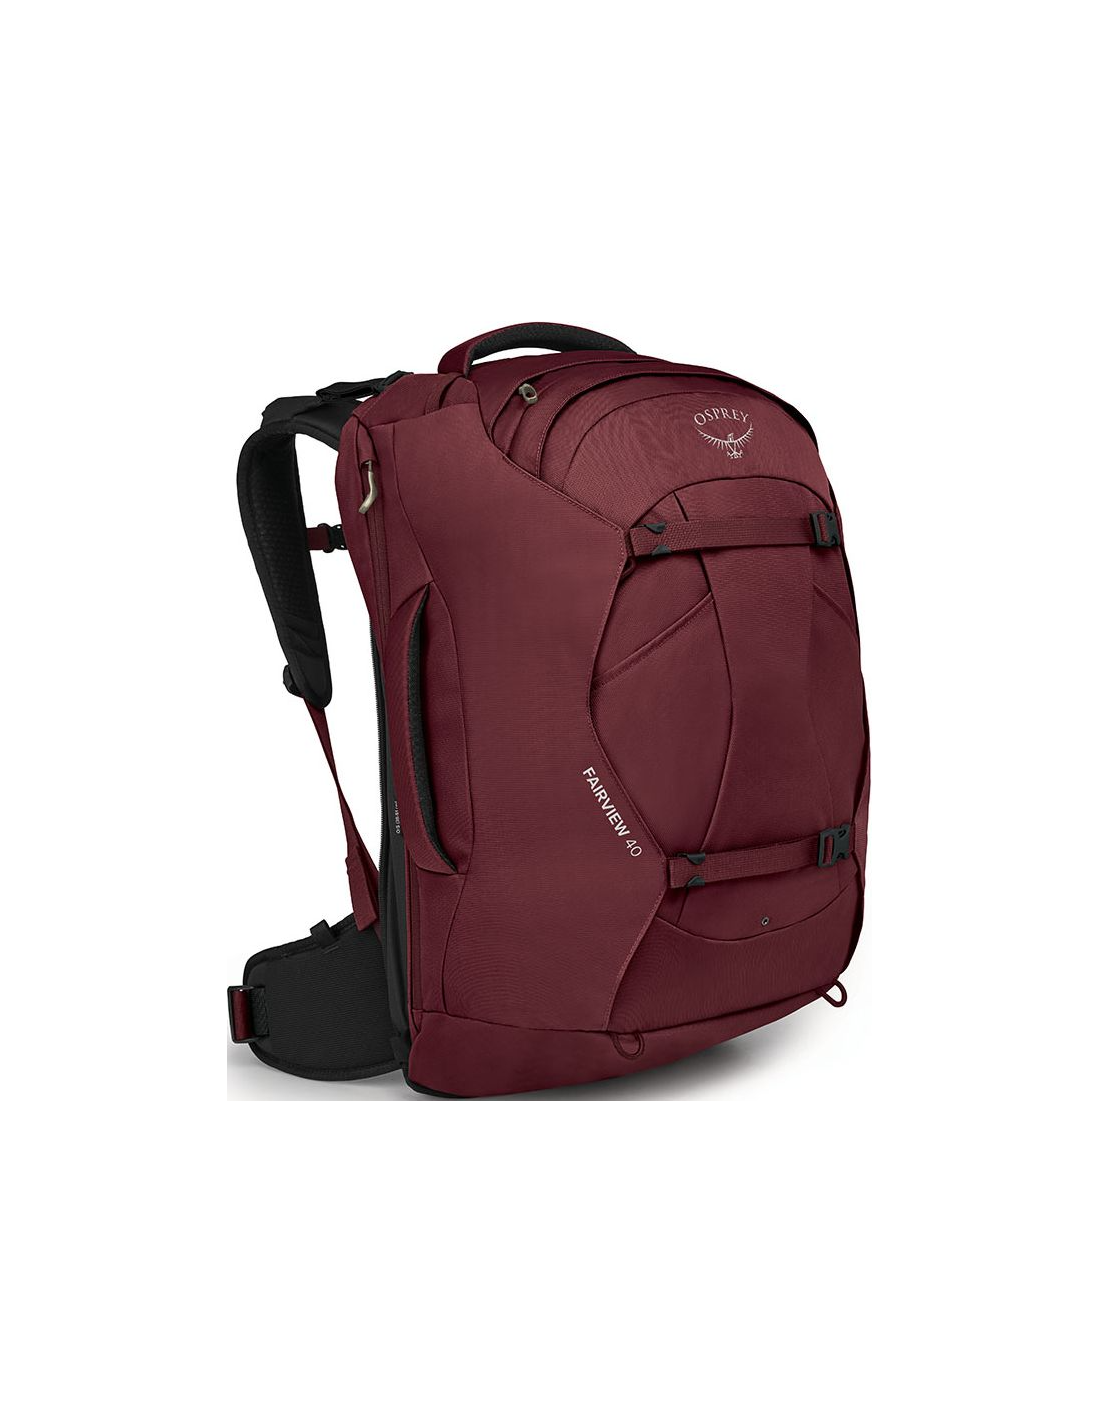 FAIRVIEW 40 TRAVEL PACK